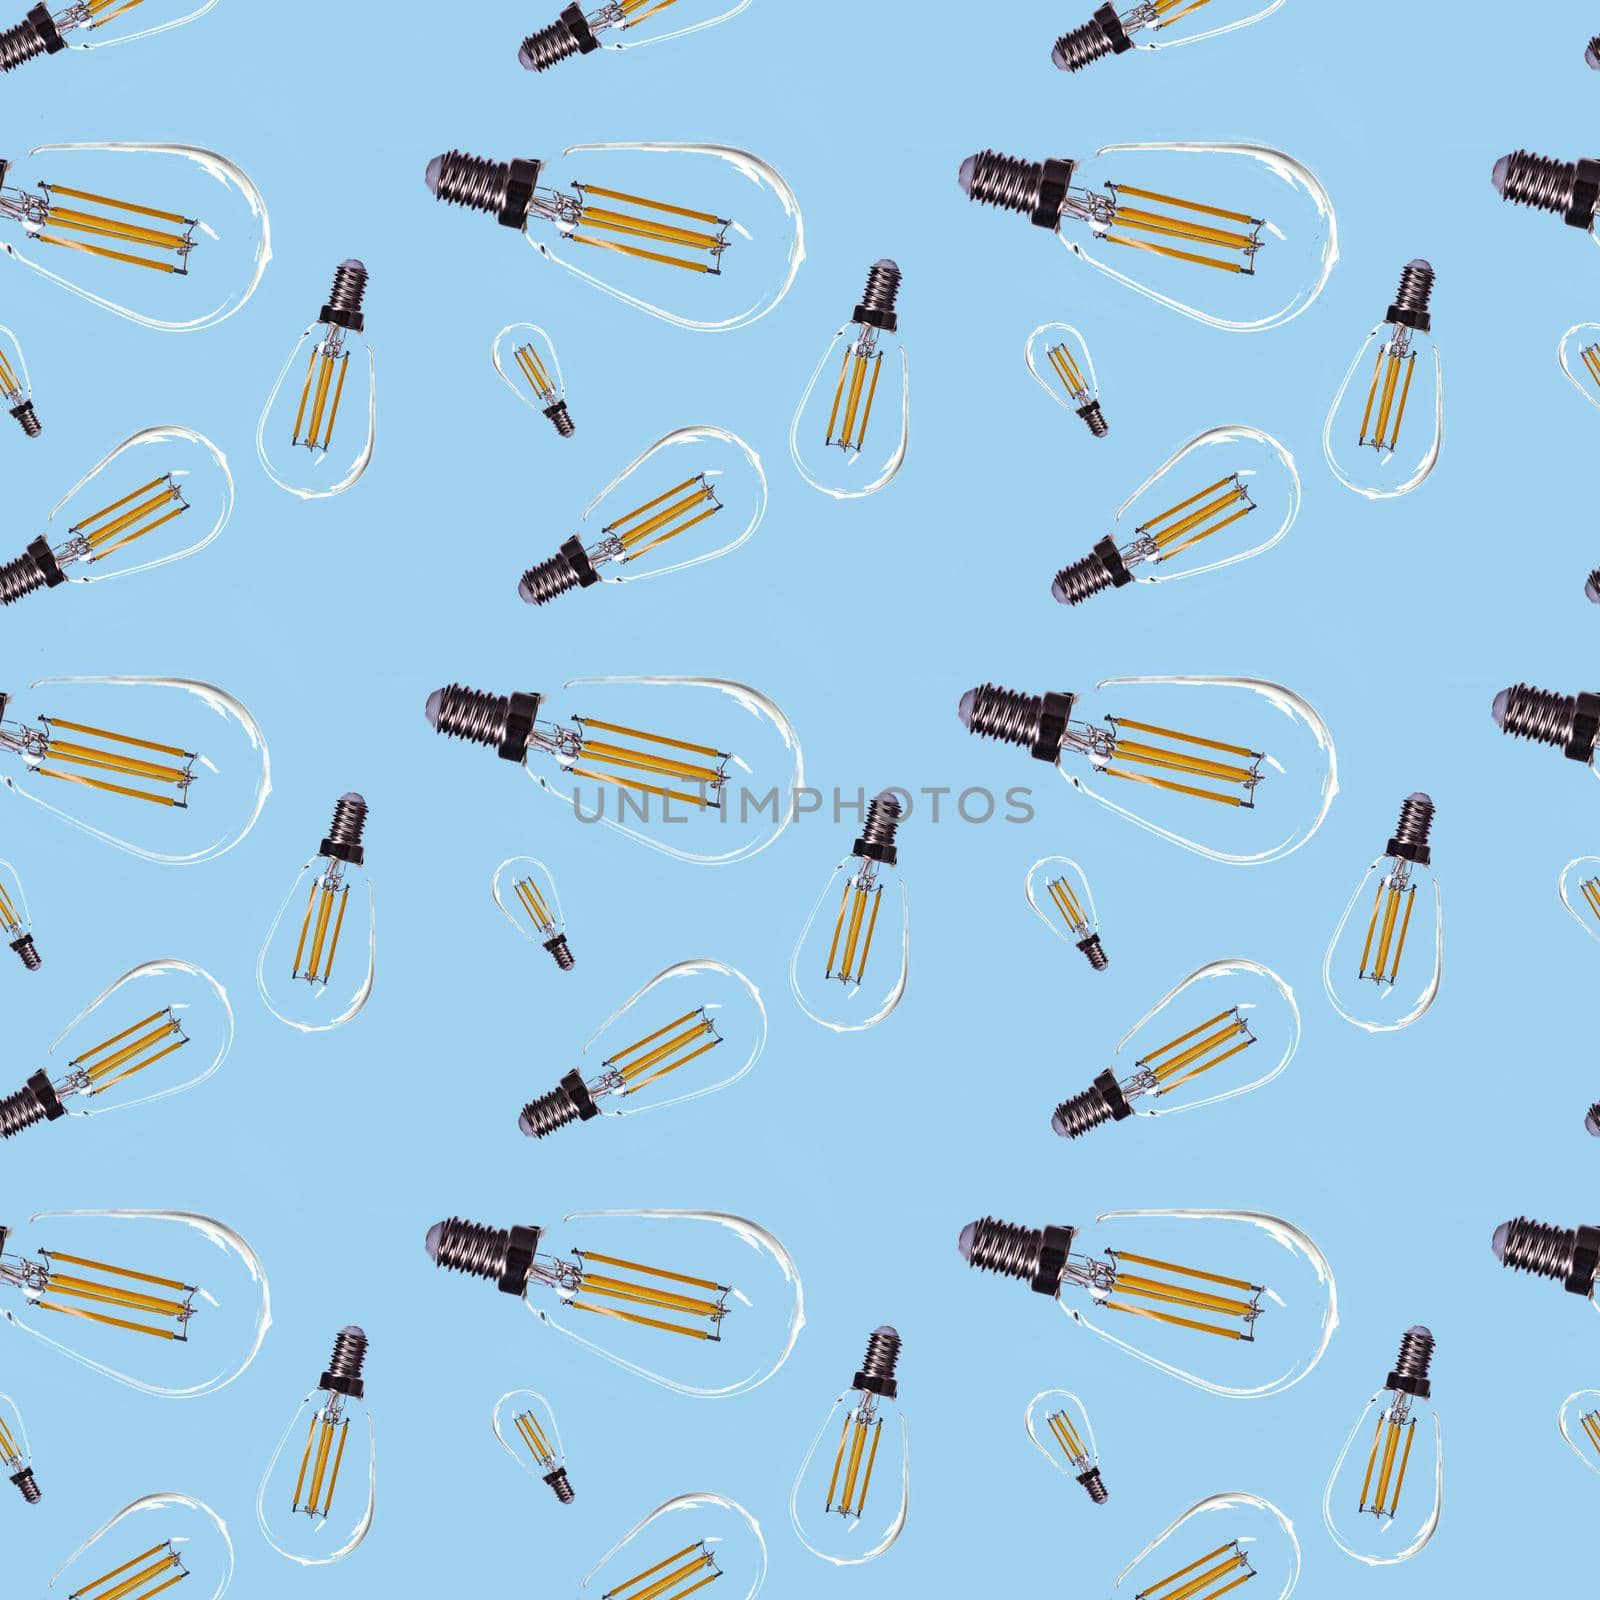 Seamless pattern in the form of electric lamps of different sizes on a blue background.